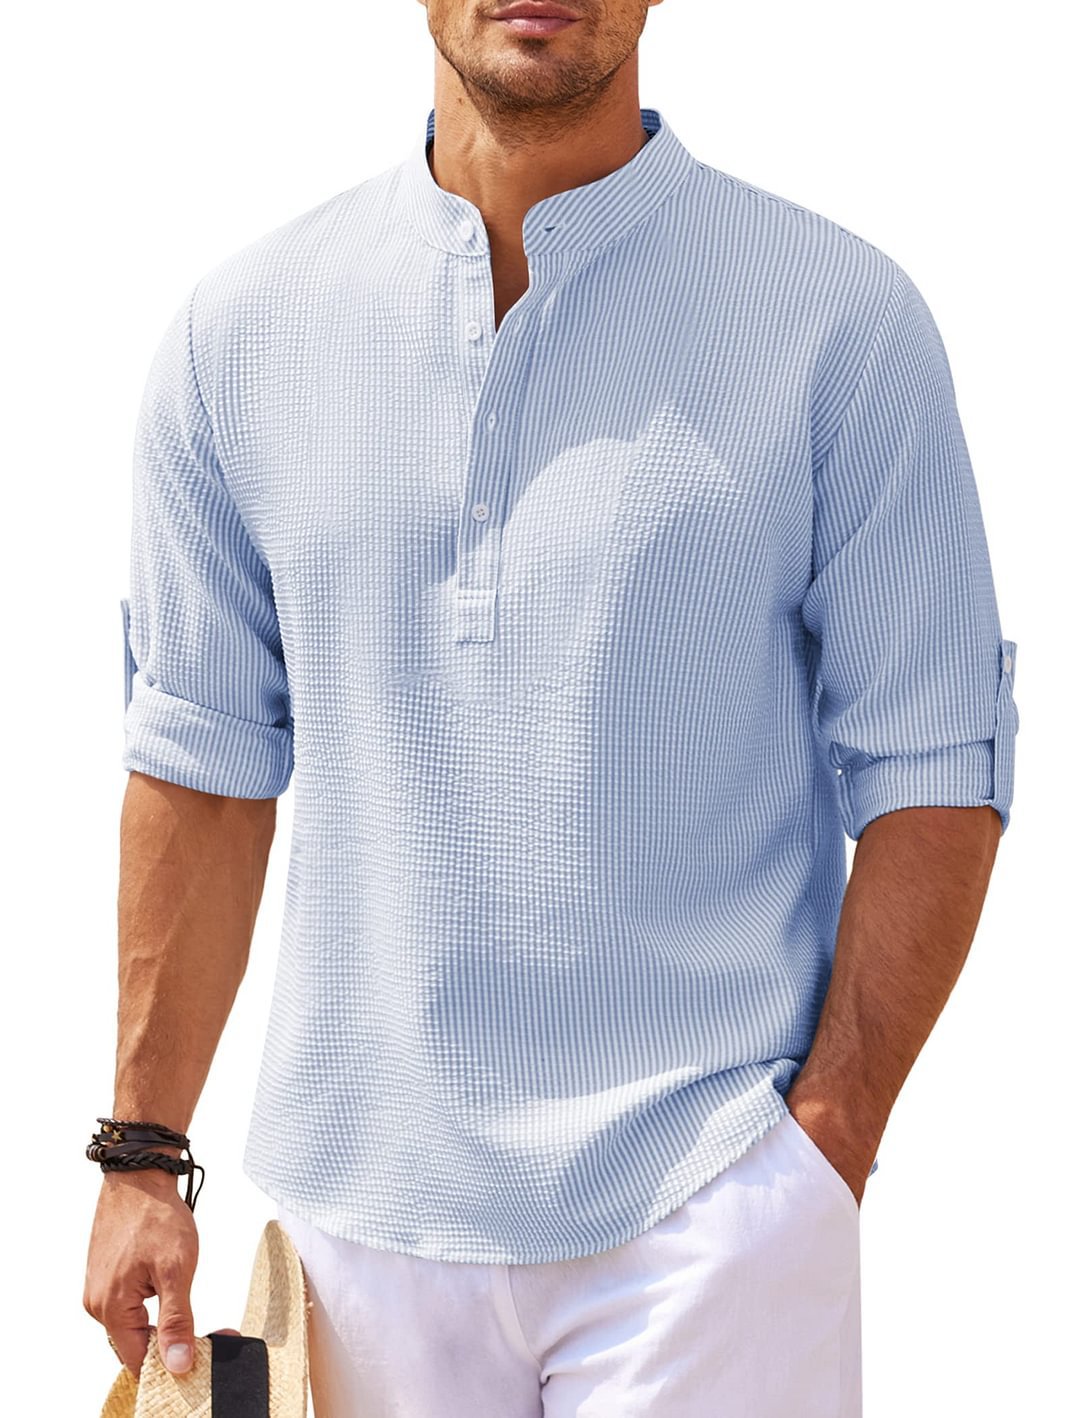 Men's Casual Shirt  Long Sleeve Stand Collar Solid Color Shirt Mens Clothing